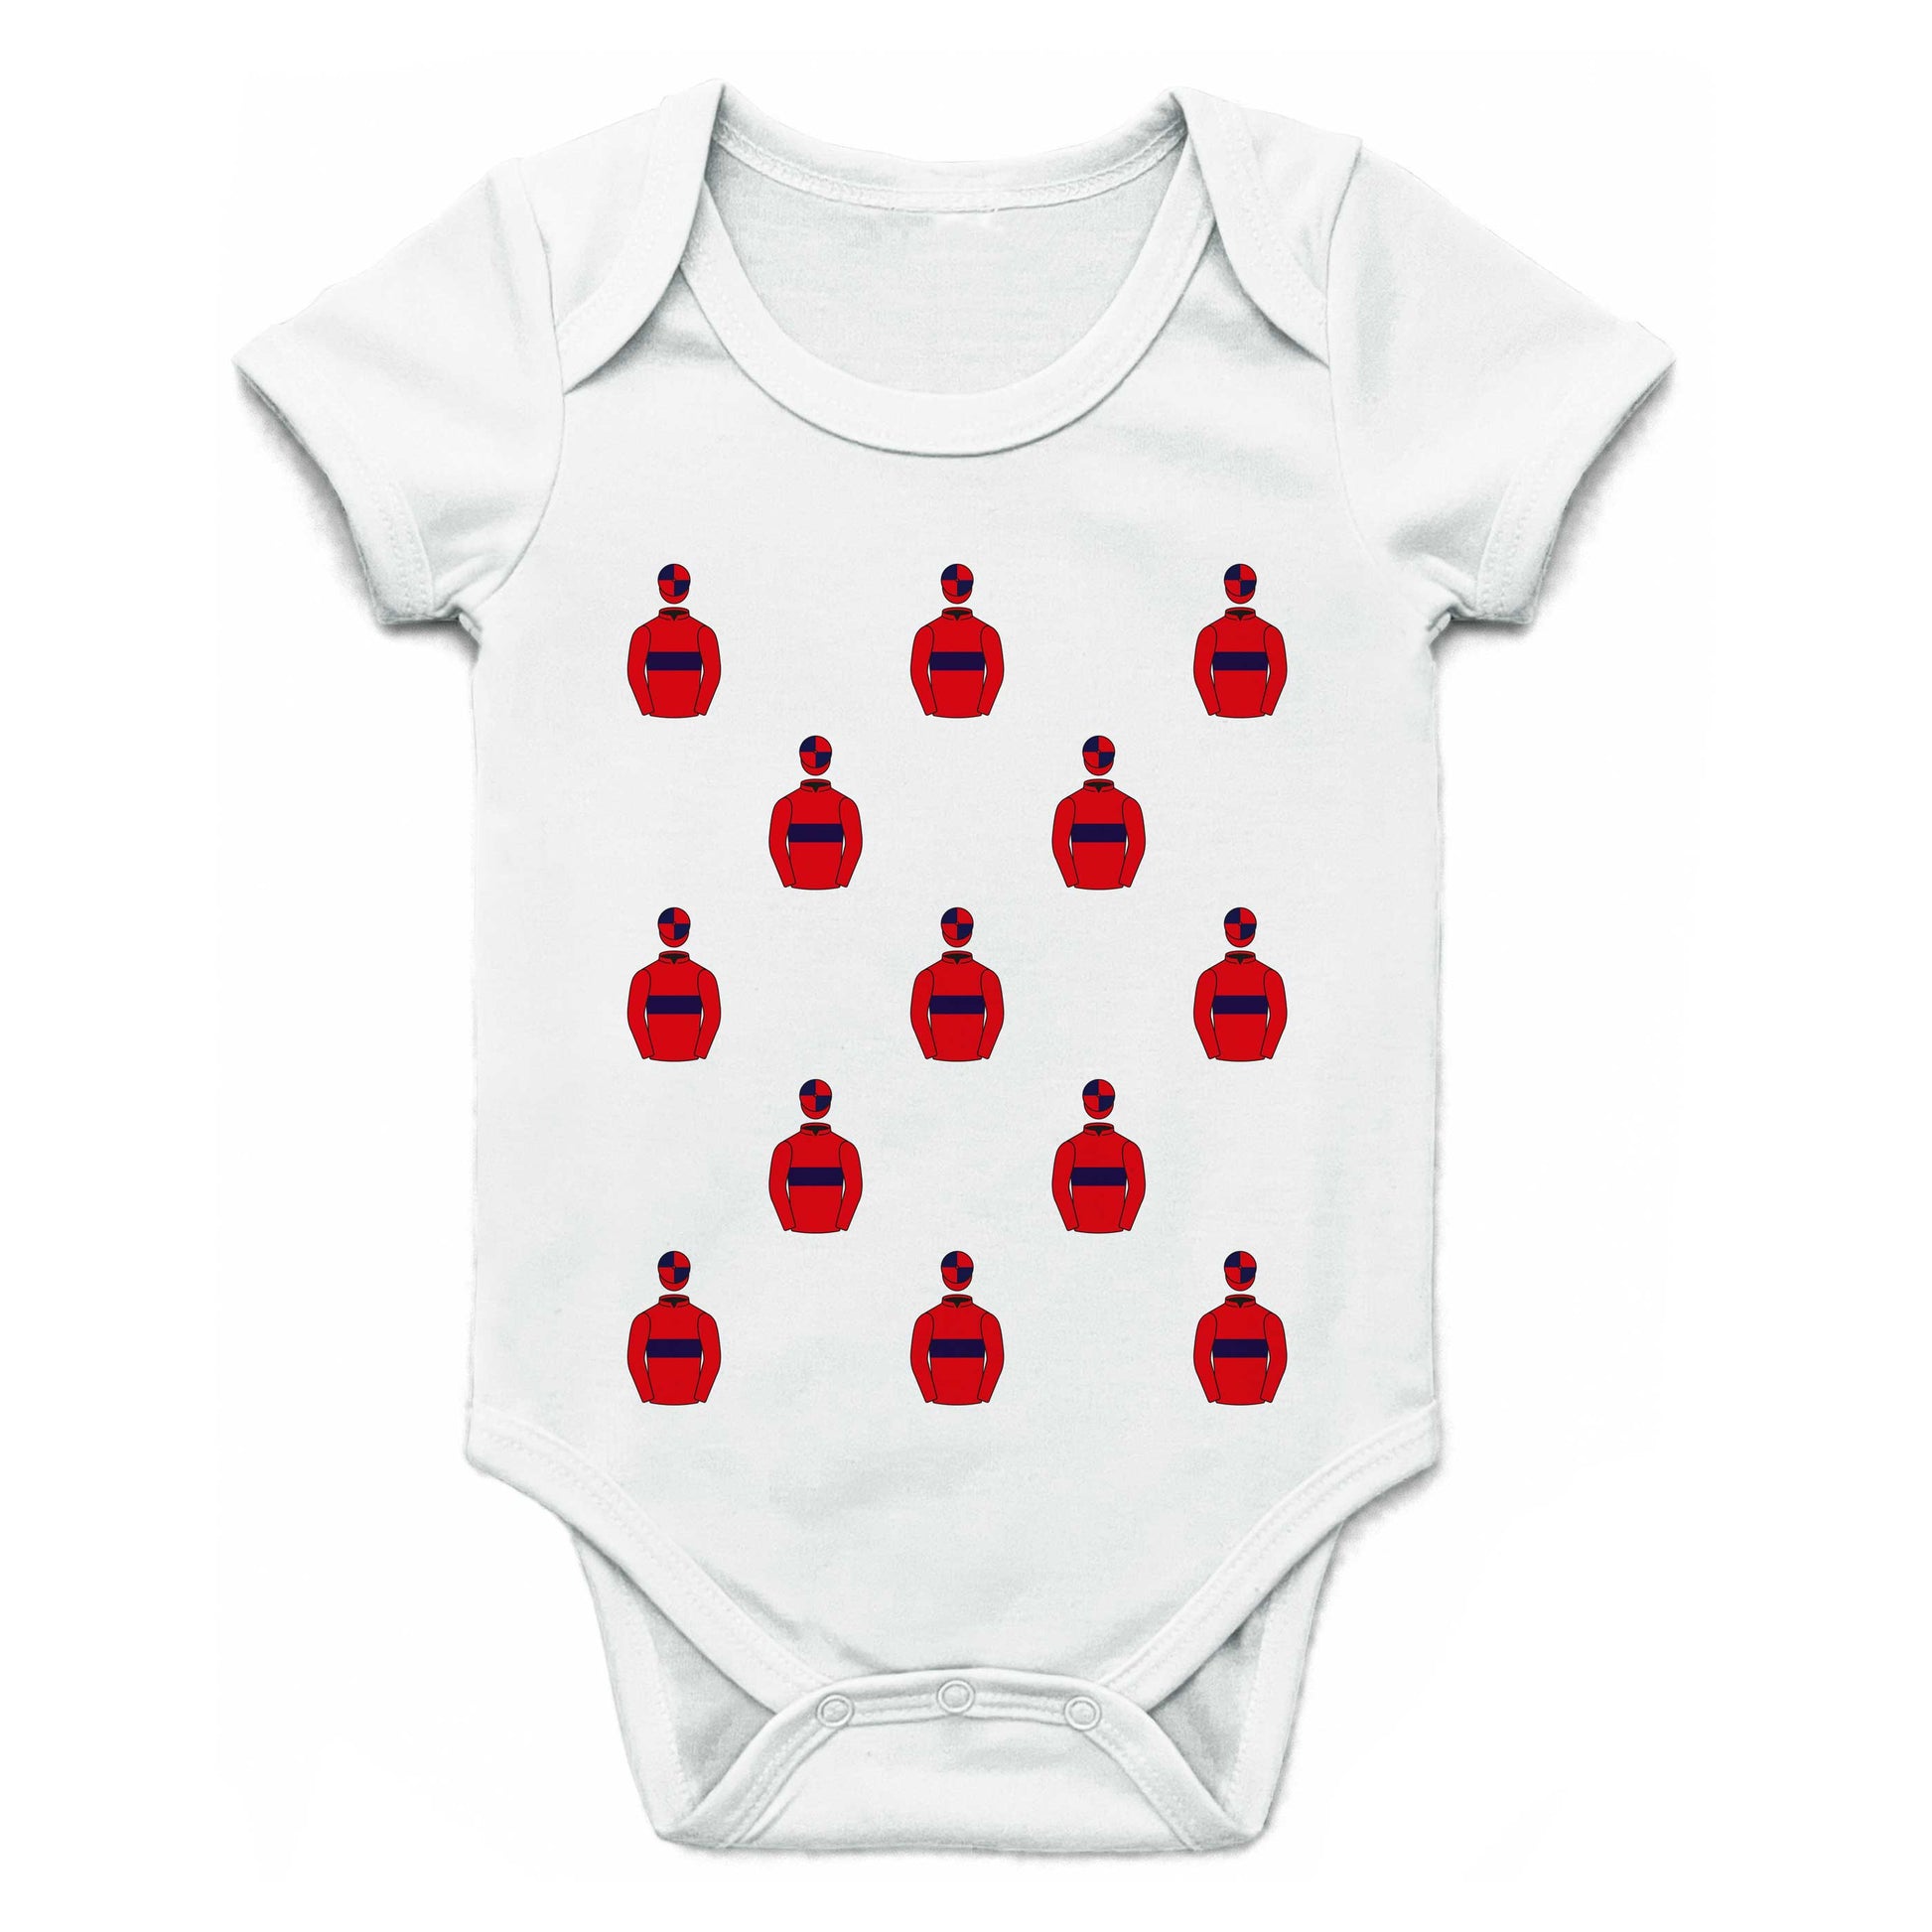 The Woodway 20 Multiple Silks Baby Grow - Baby Grow - Hacked Up